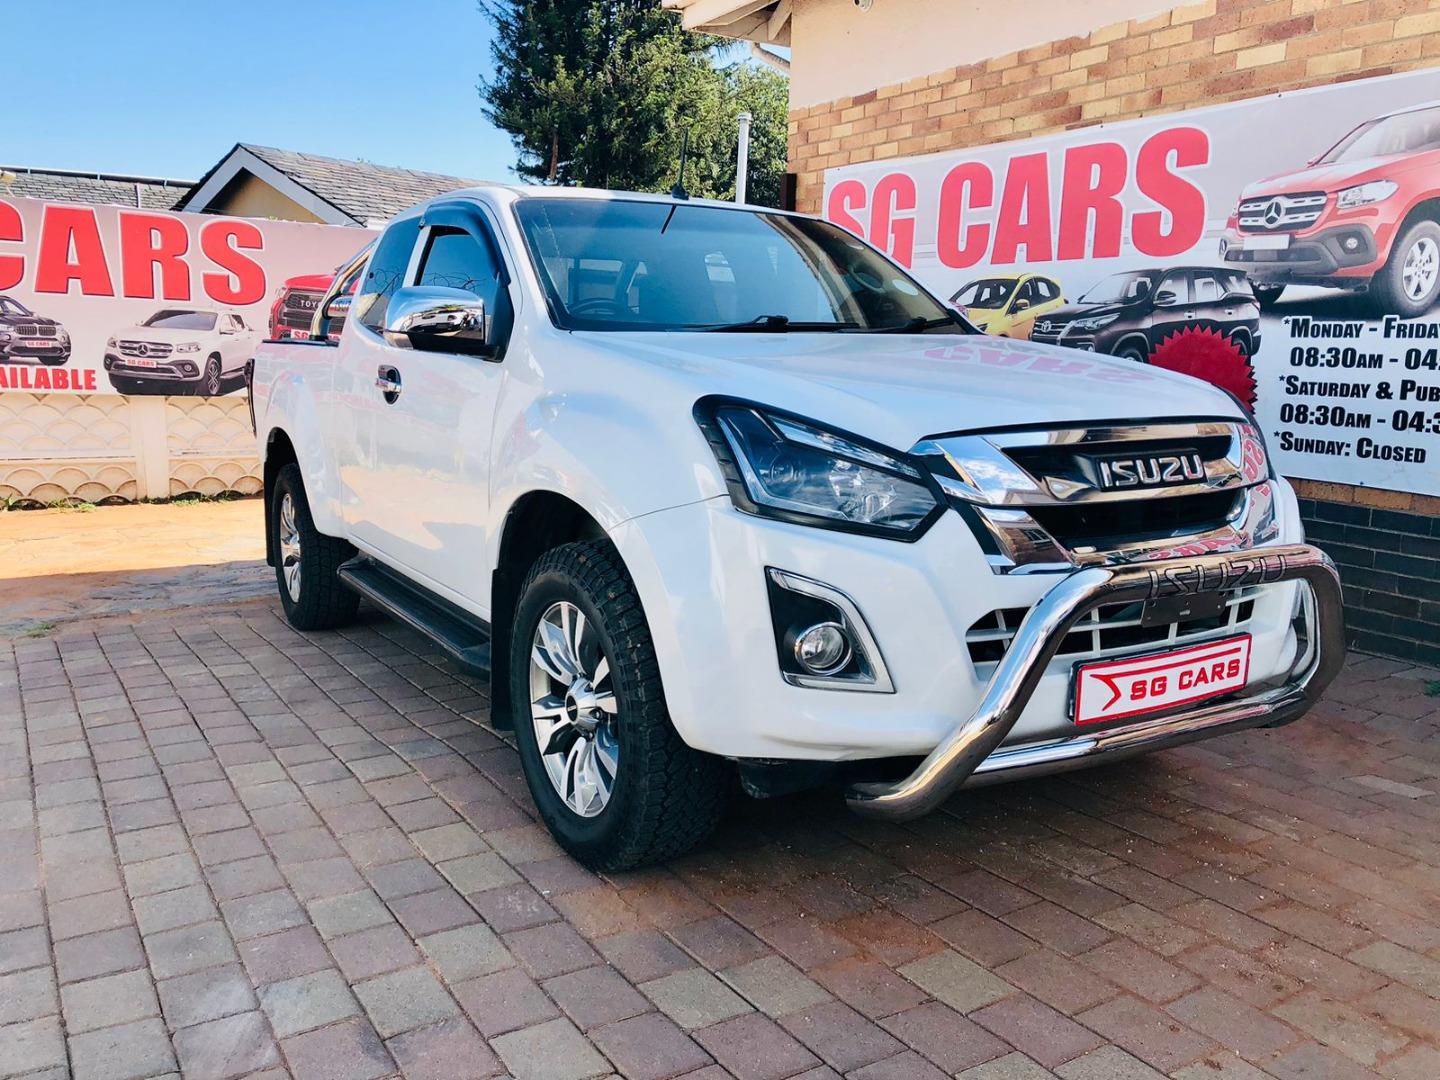 2018 Isuzu KB 300D-Teq Extended Cab LX Auto For Sale